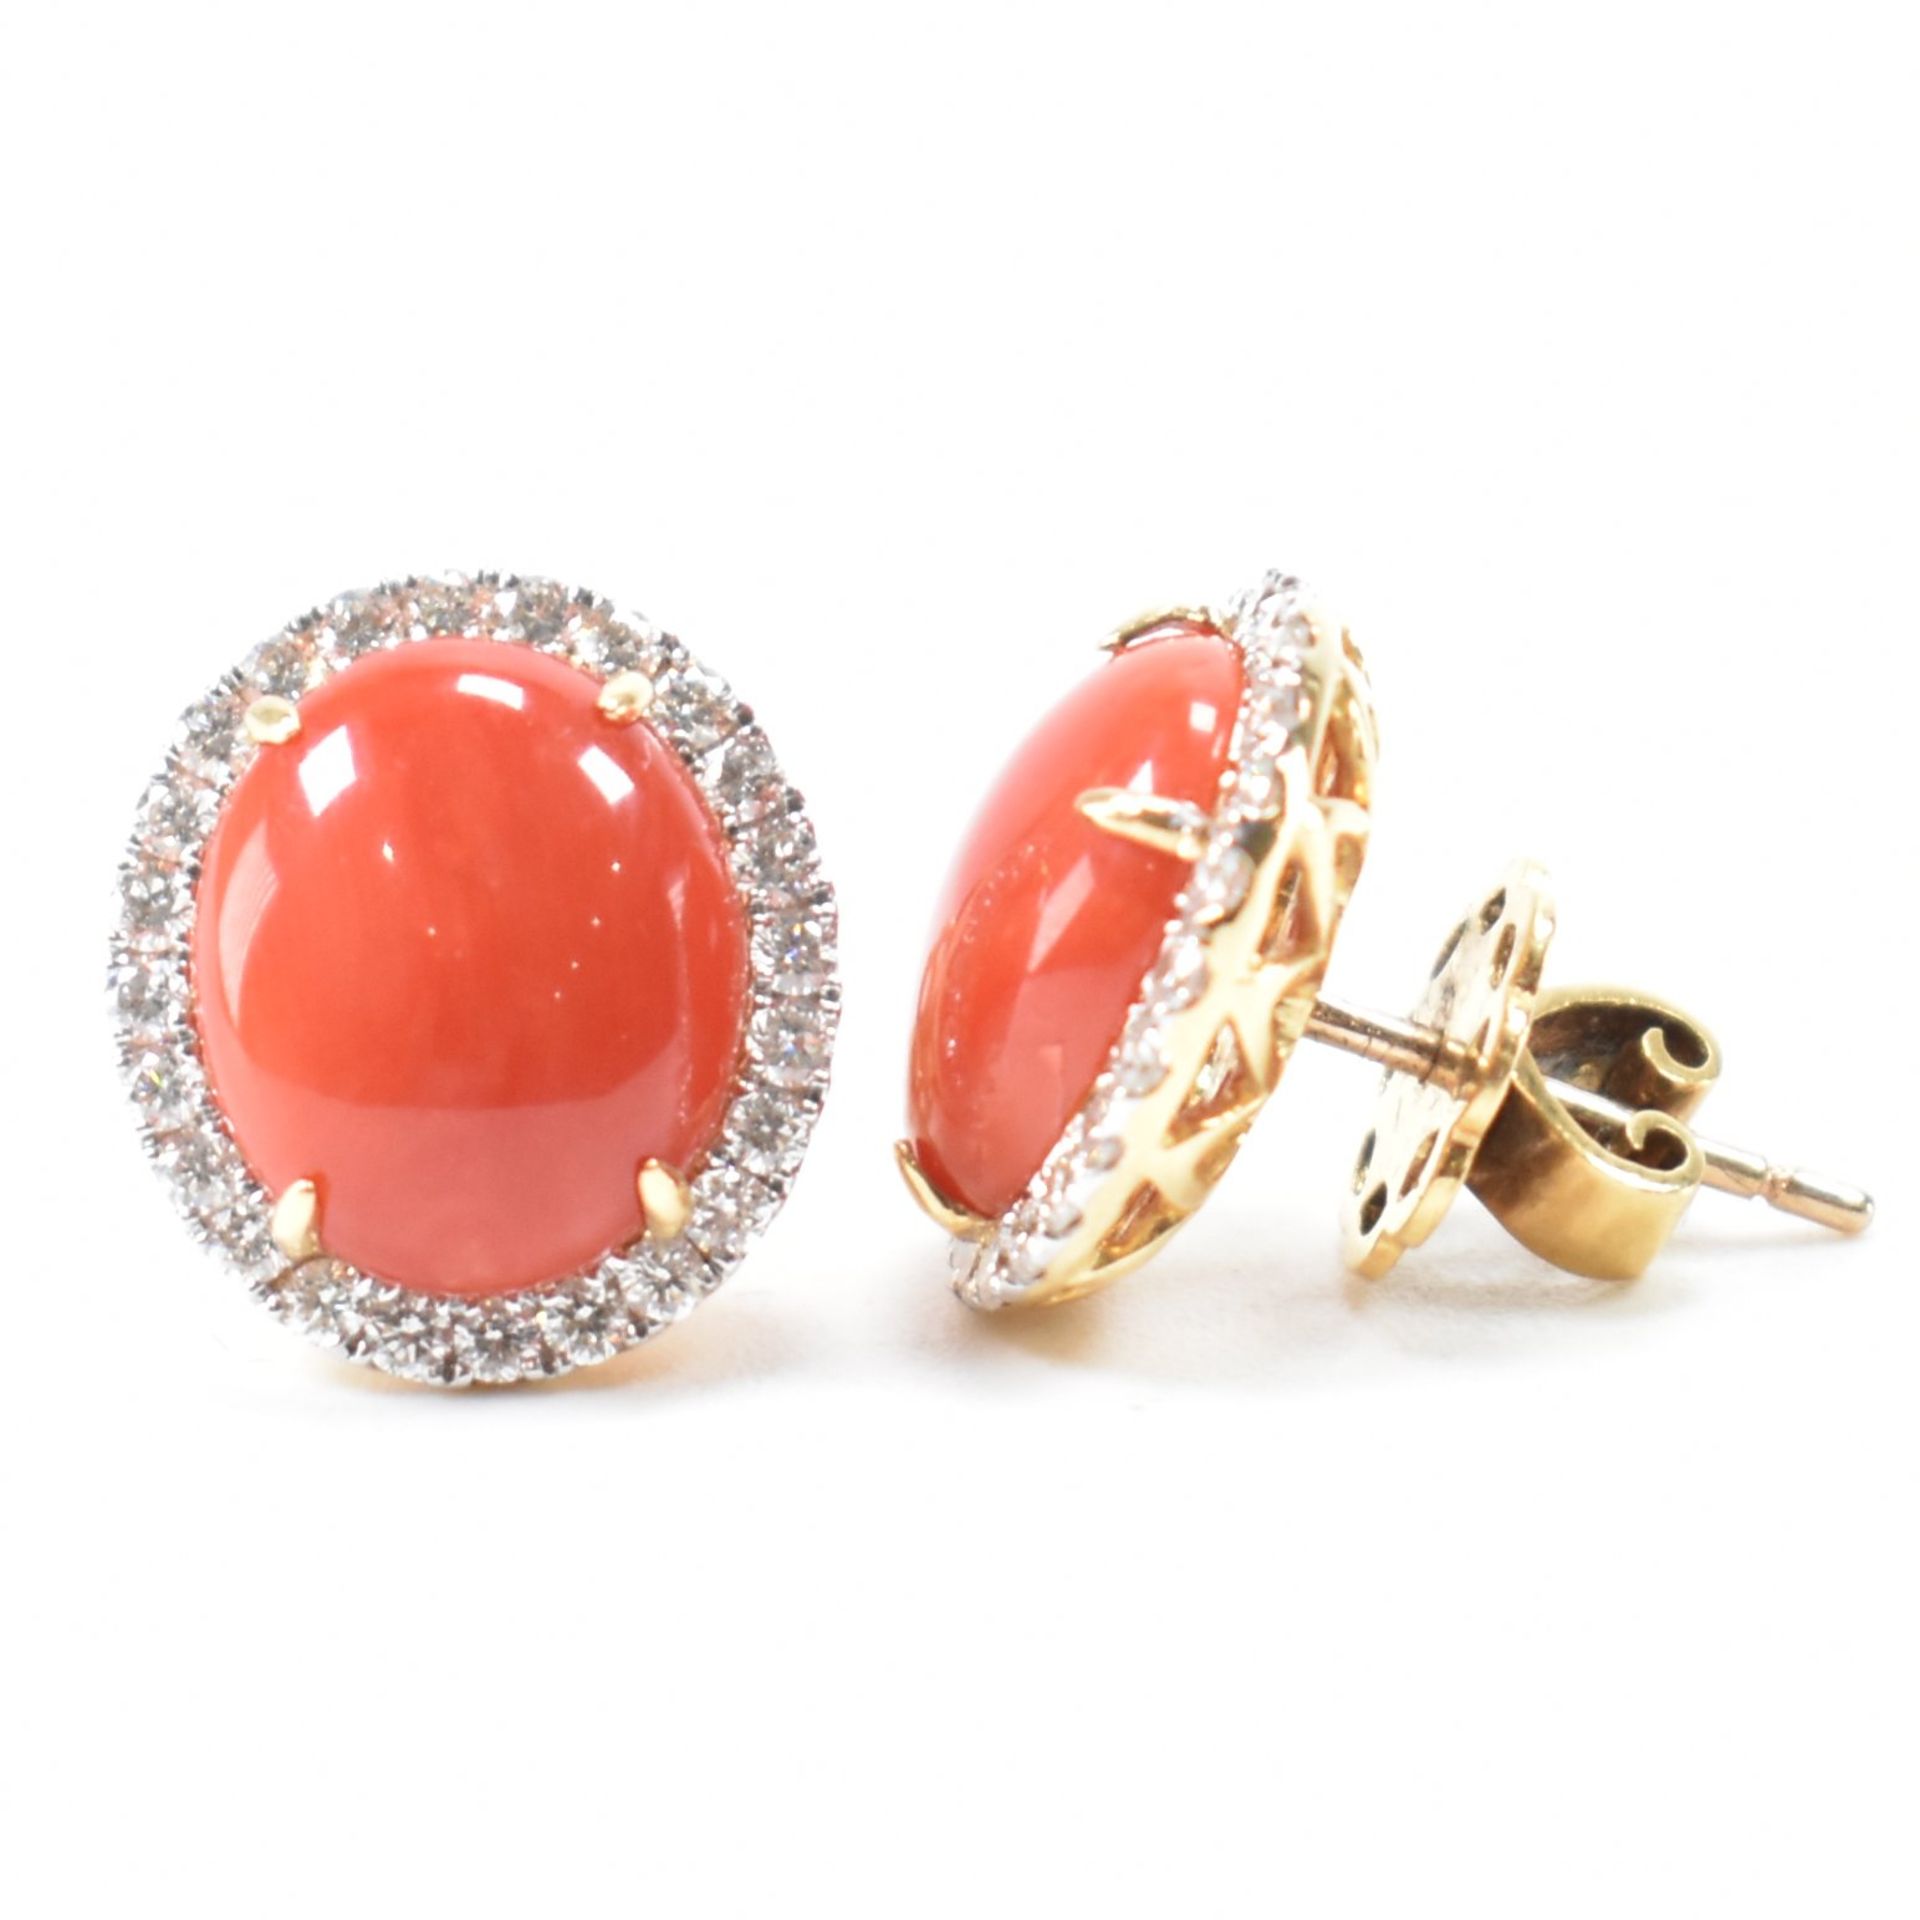 PAIR OF 18CT GOLD CORAL & DIAMOND EARRINGS - Image 2 of 4